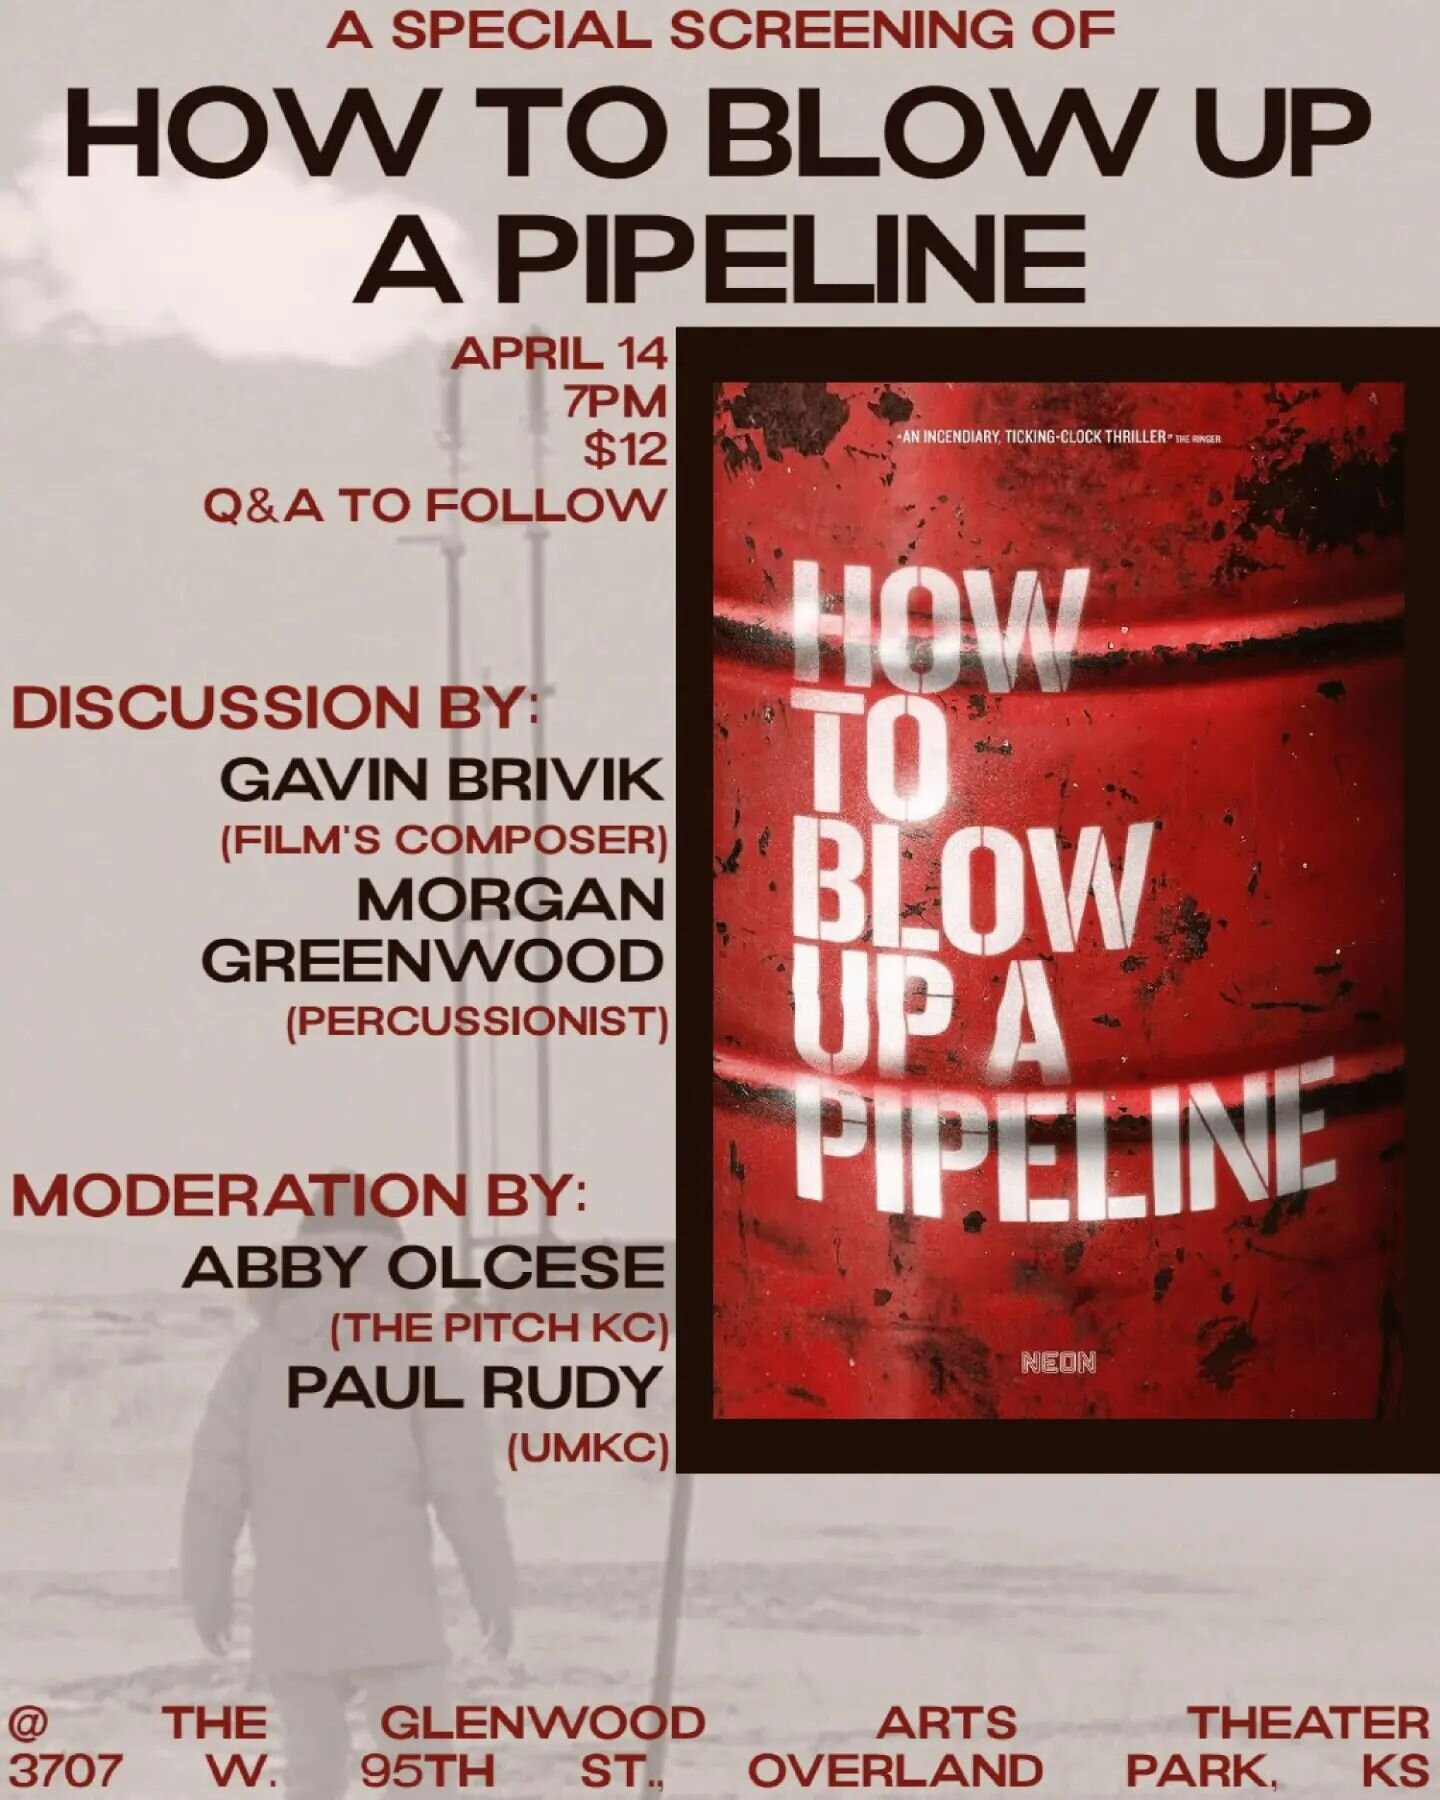 🎬Join us TOMORROW NIGHT for an exclusive screening of the new film from @neonrated How to Blow Up A Pipeline, followed by a Q&amp;A session with the film's composer, @gavinbrivik hosted by @thepitchkc's @indieabby88!🎵

Film Society KC members can s